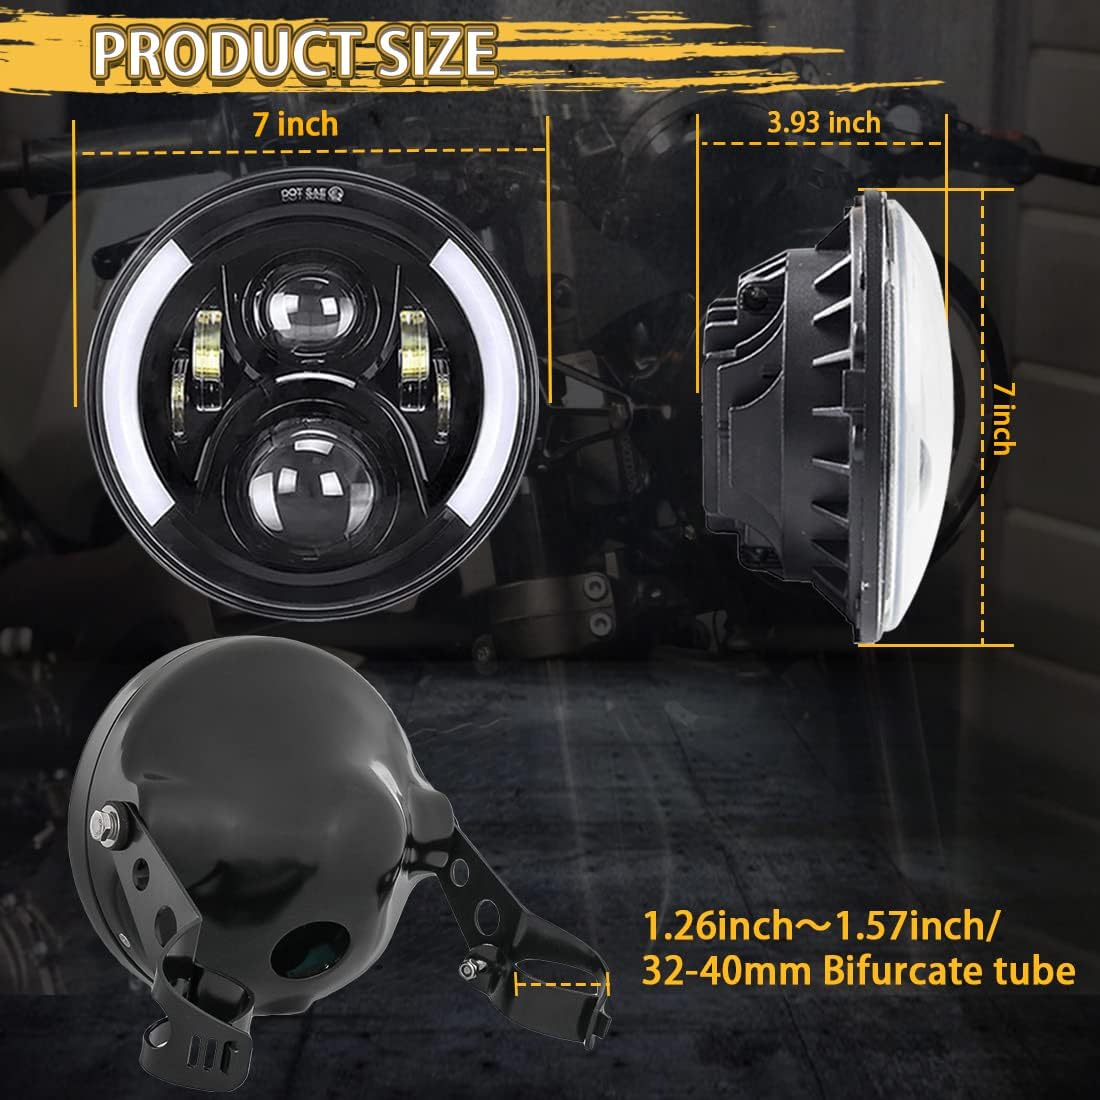 SKTYANTS 7" 7 Inch Round LED Motorcycle Headlight assembly - $55